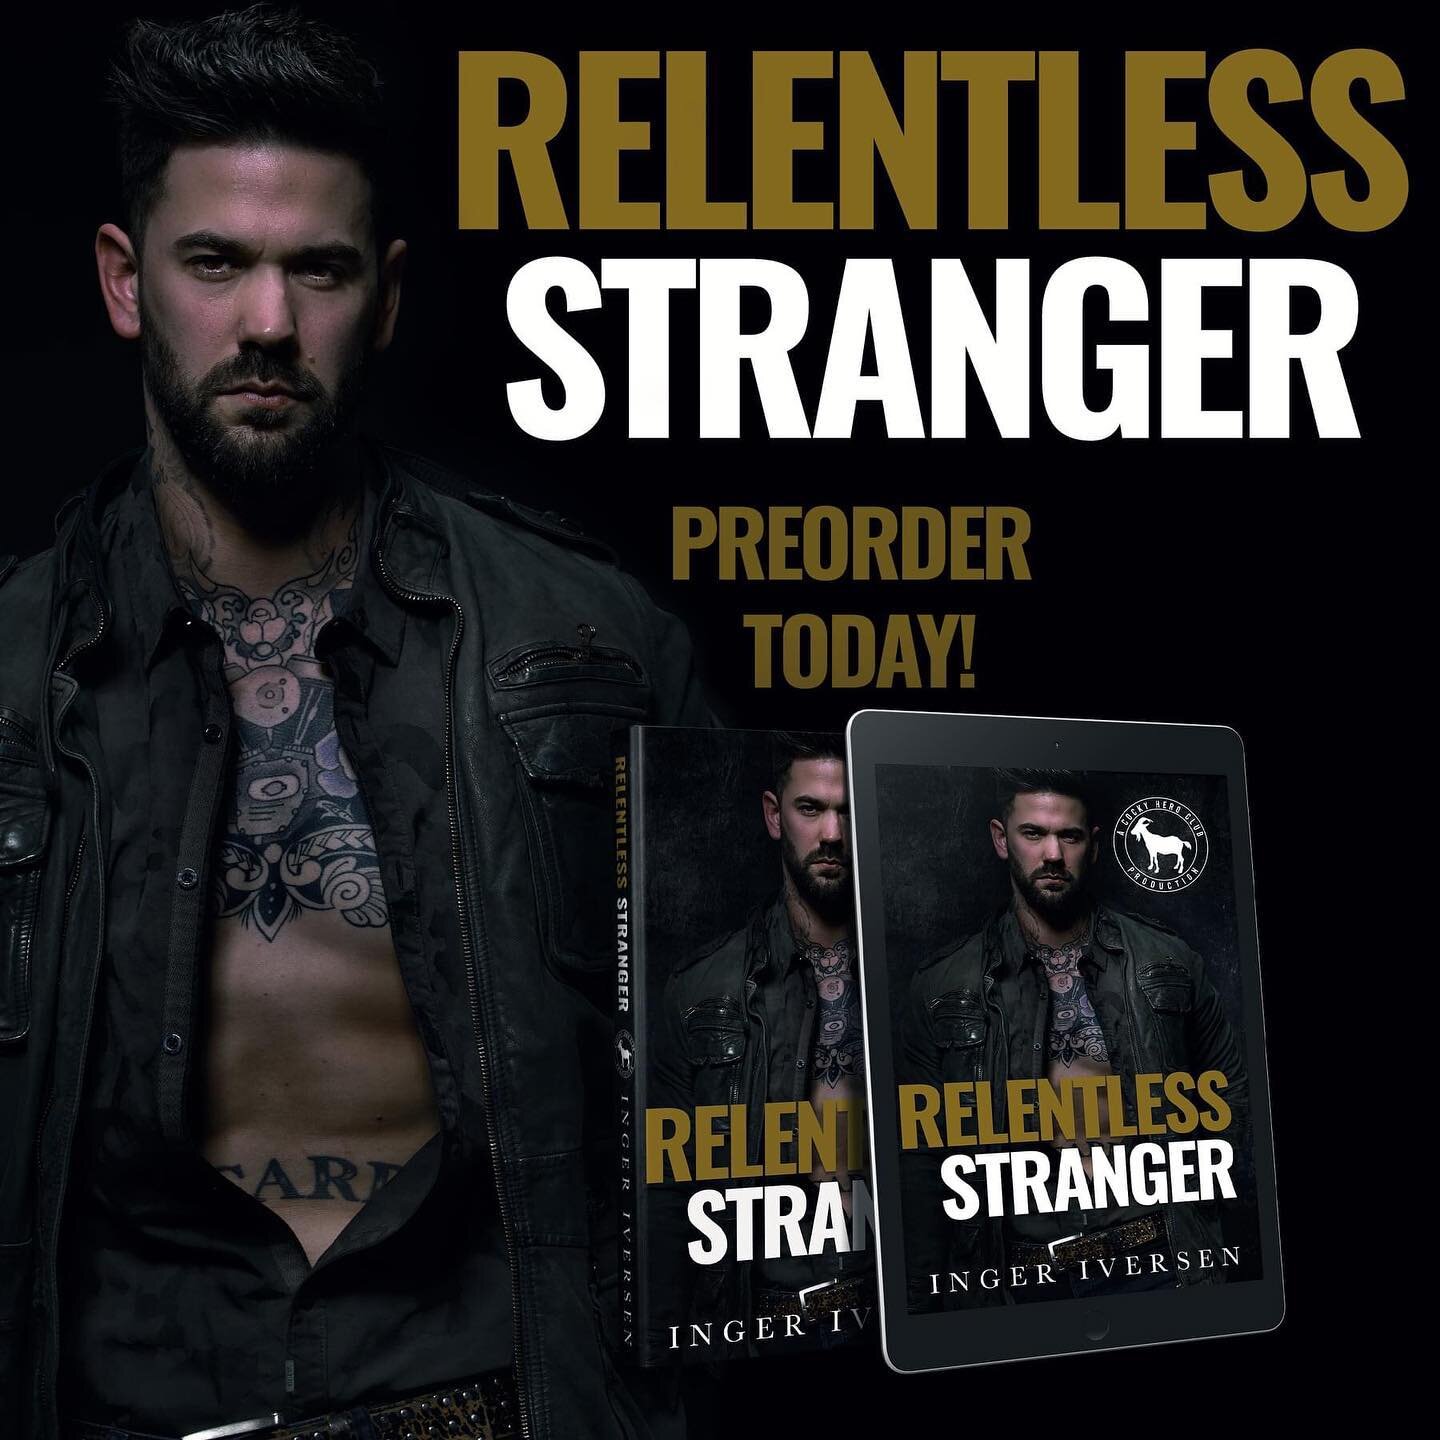 YOU CAN PREORDER RELENTLESS STRANGER TODAY!
Grab Vivi and Eddie's story today!
A dangerous biker&rsquo;s arms could be the safest place for her heart&hellip;
#romance #BWWM #steamyromance #preorder #cockyheroclub 
amazon: https://smarturl.it/relentle